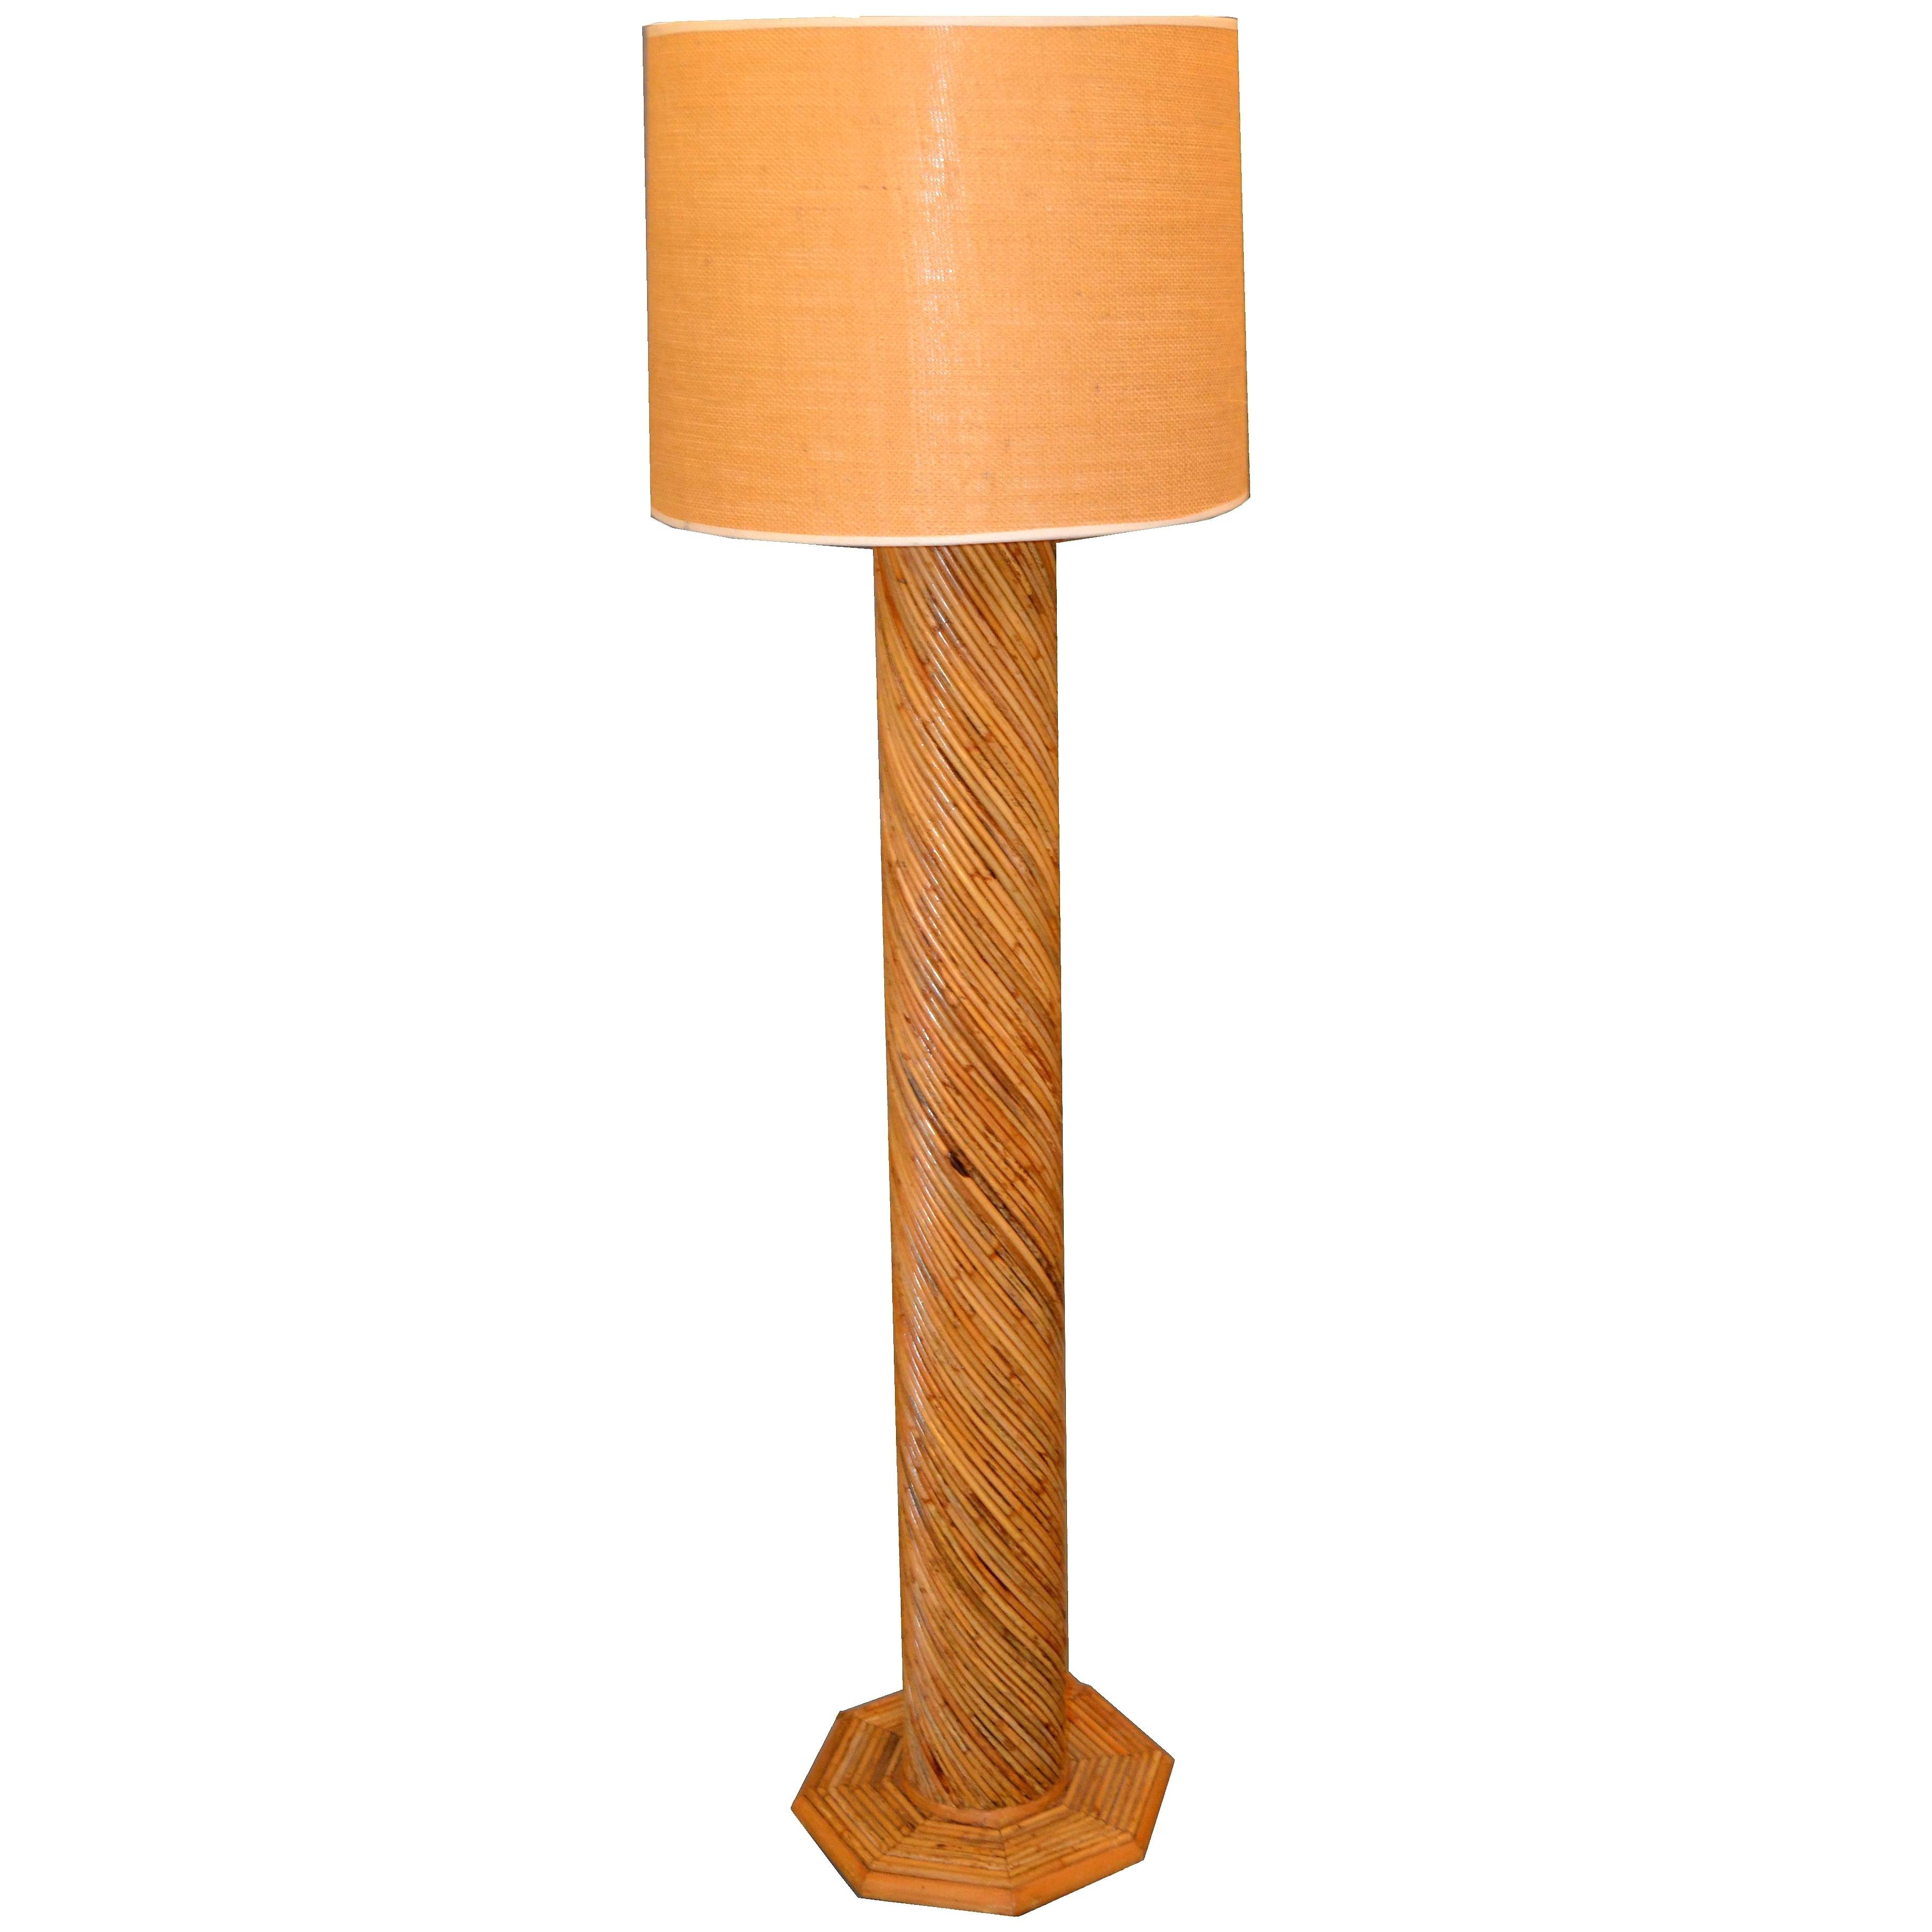 Pencil Floor Lamp Overlordfull within sizing 3616 X 3616